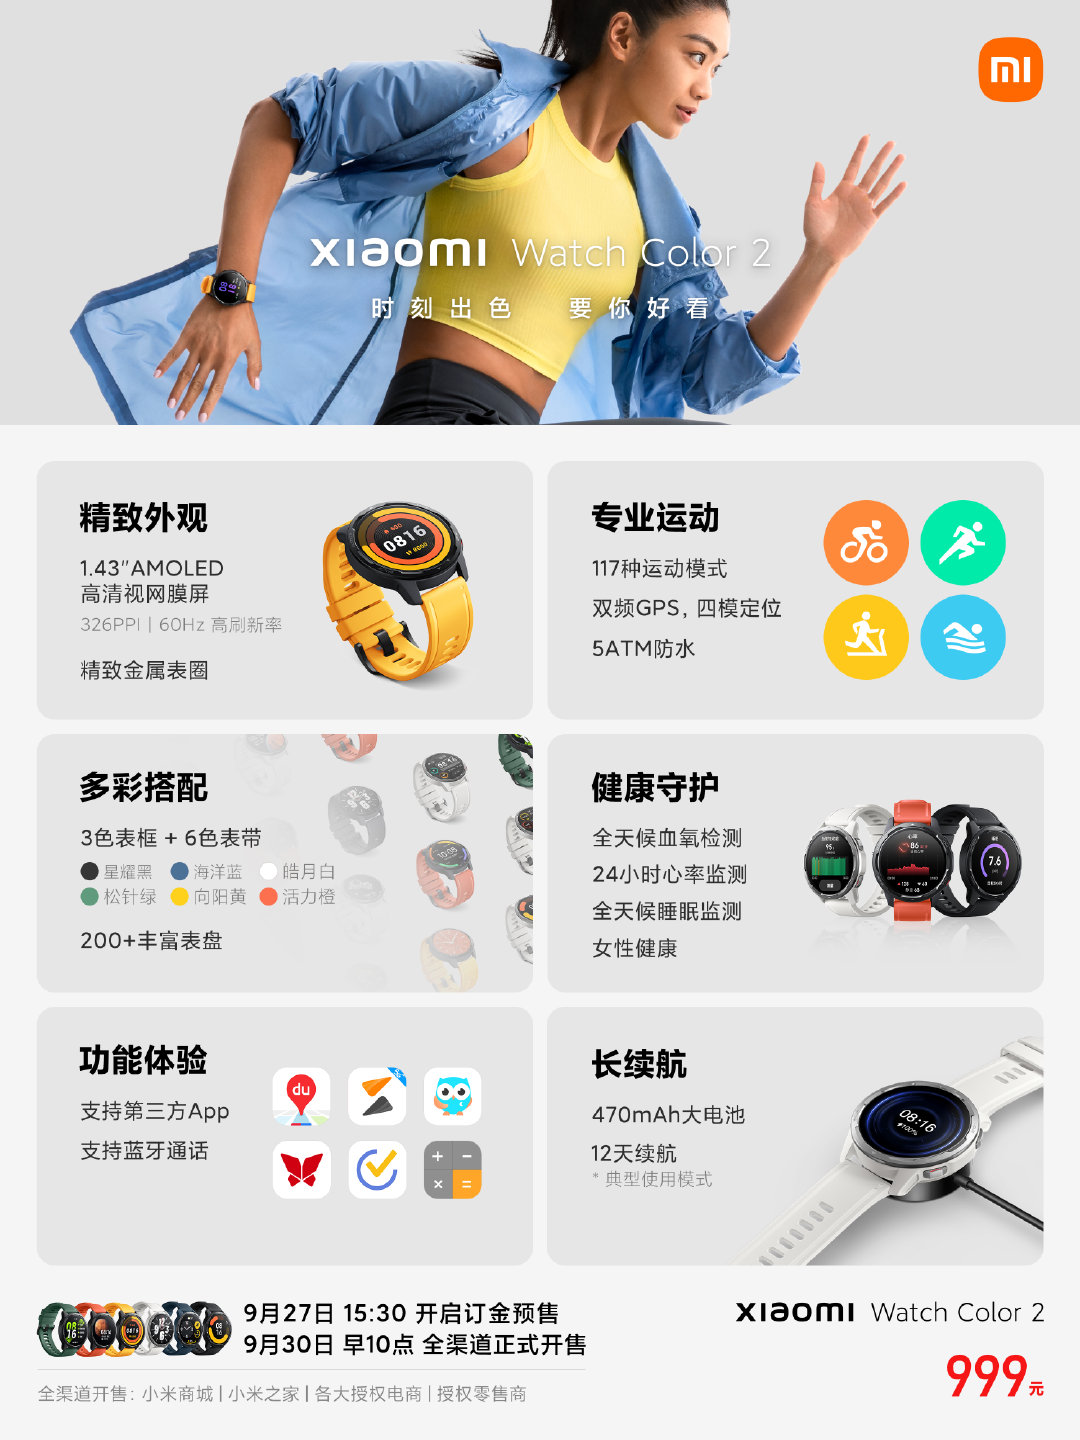 Xiaomi Watch Color 2 Features